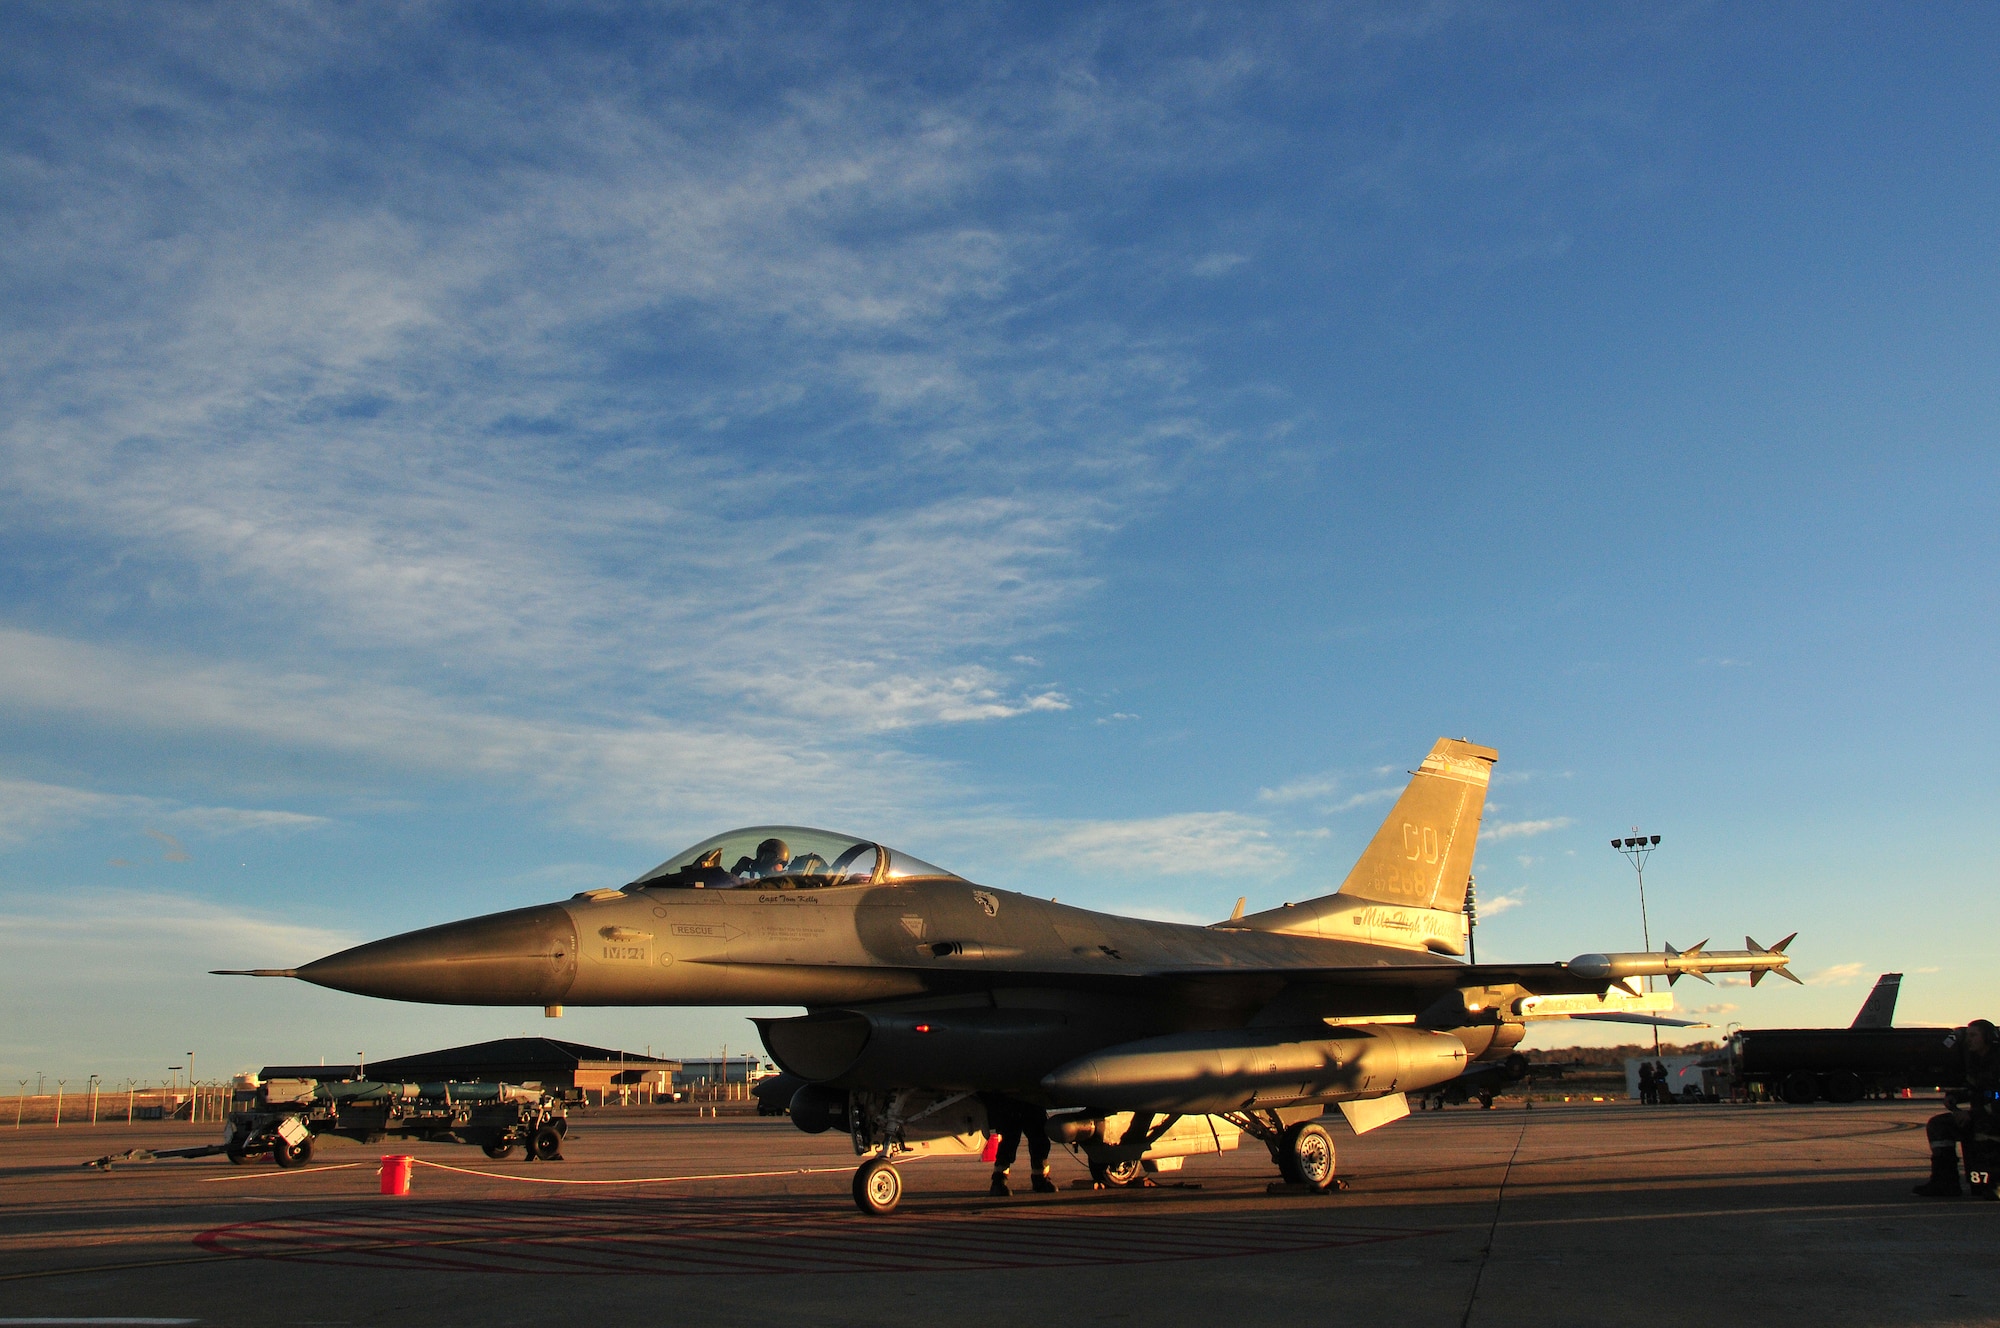 U.S. Air Force F-16 Fighting Falcon pilot from the 120th Fighter Wing, waits for ground crew members to finish their checks during the Operational Readiness Exercise at Buckley Air Force Base Colo., January 21, 2012. Buckley Air National Guard Airmen are taking part in the exercise to evaluate them with mission readiness in preparation for real world deployments as well the Operational Readiness Inspection being held in the spring.  (U.S. Air Force photo by Tech. Sgt. Wolfram M. Stumpf/RELEASED)